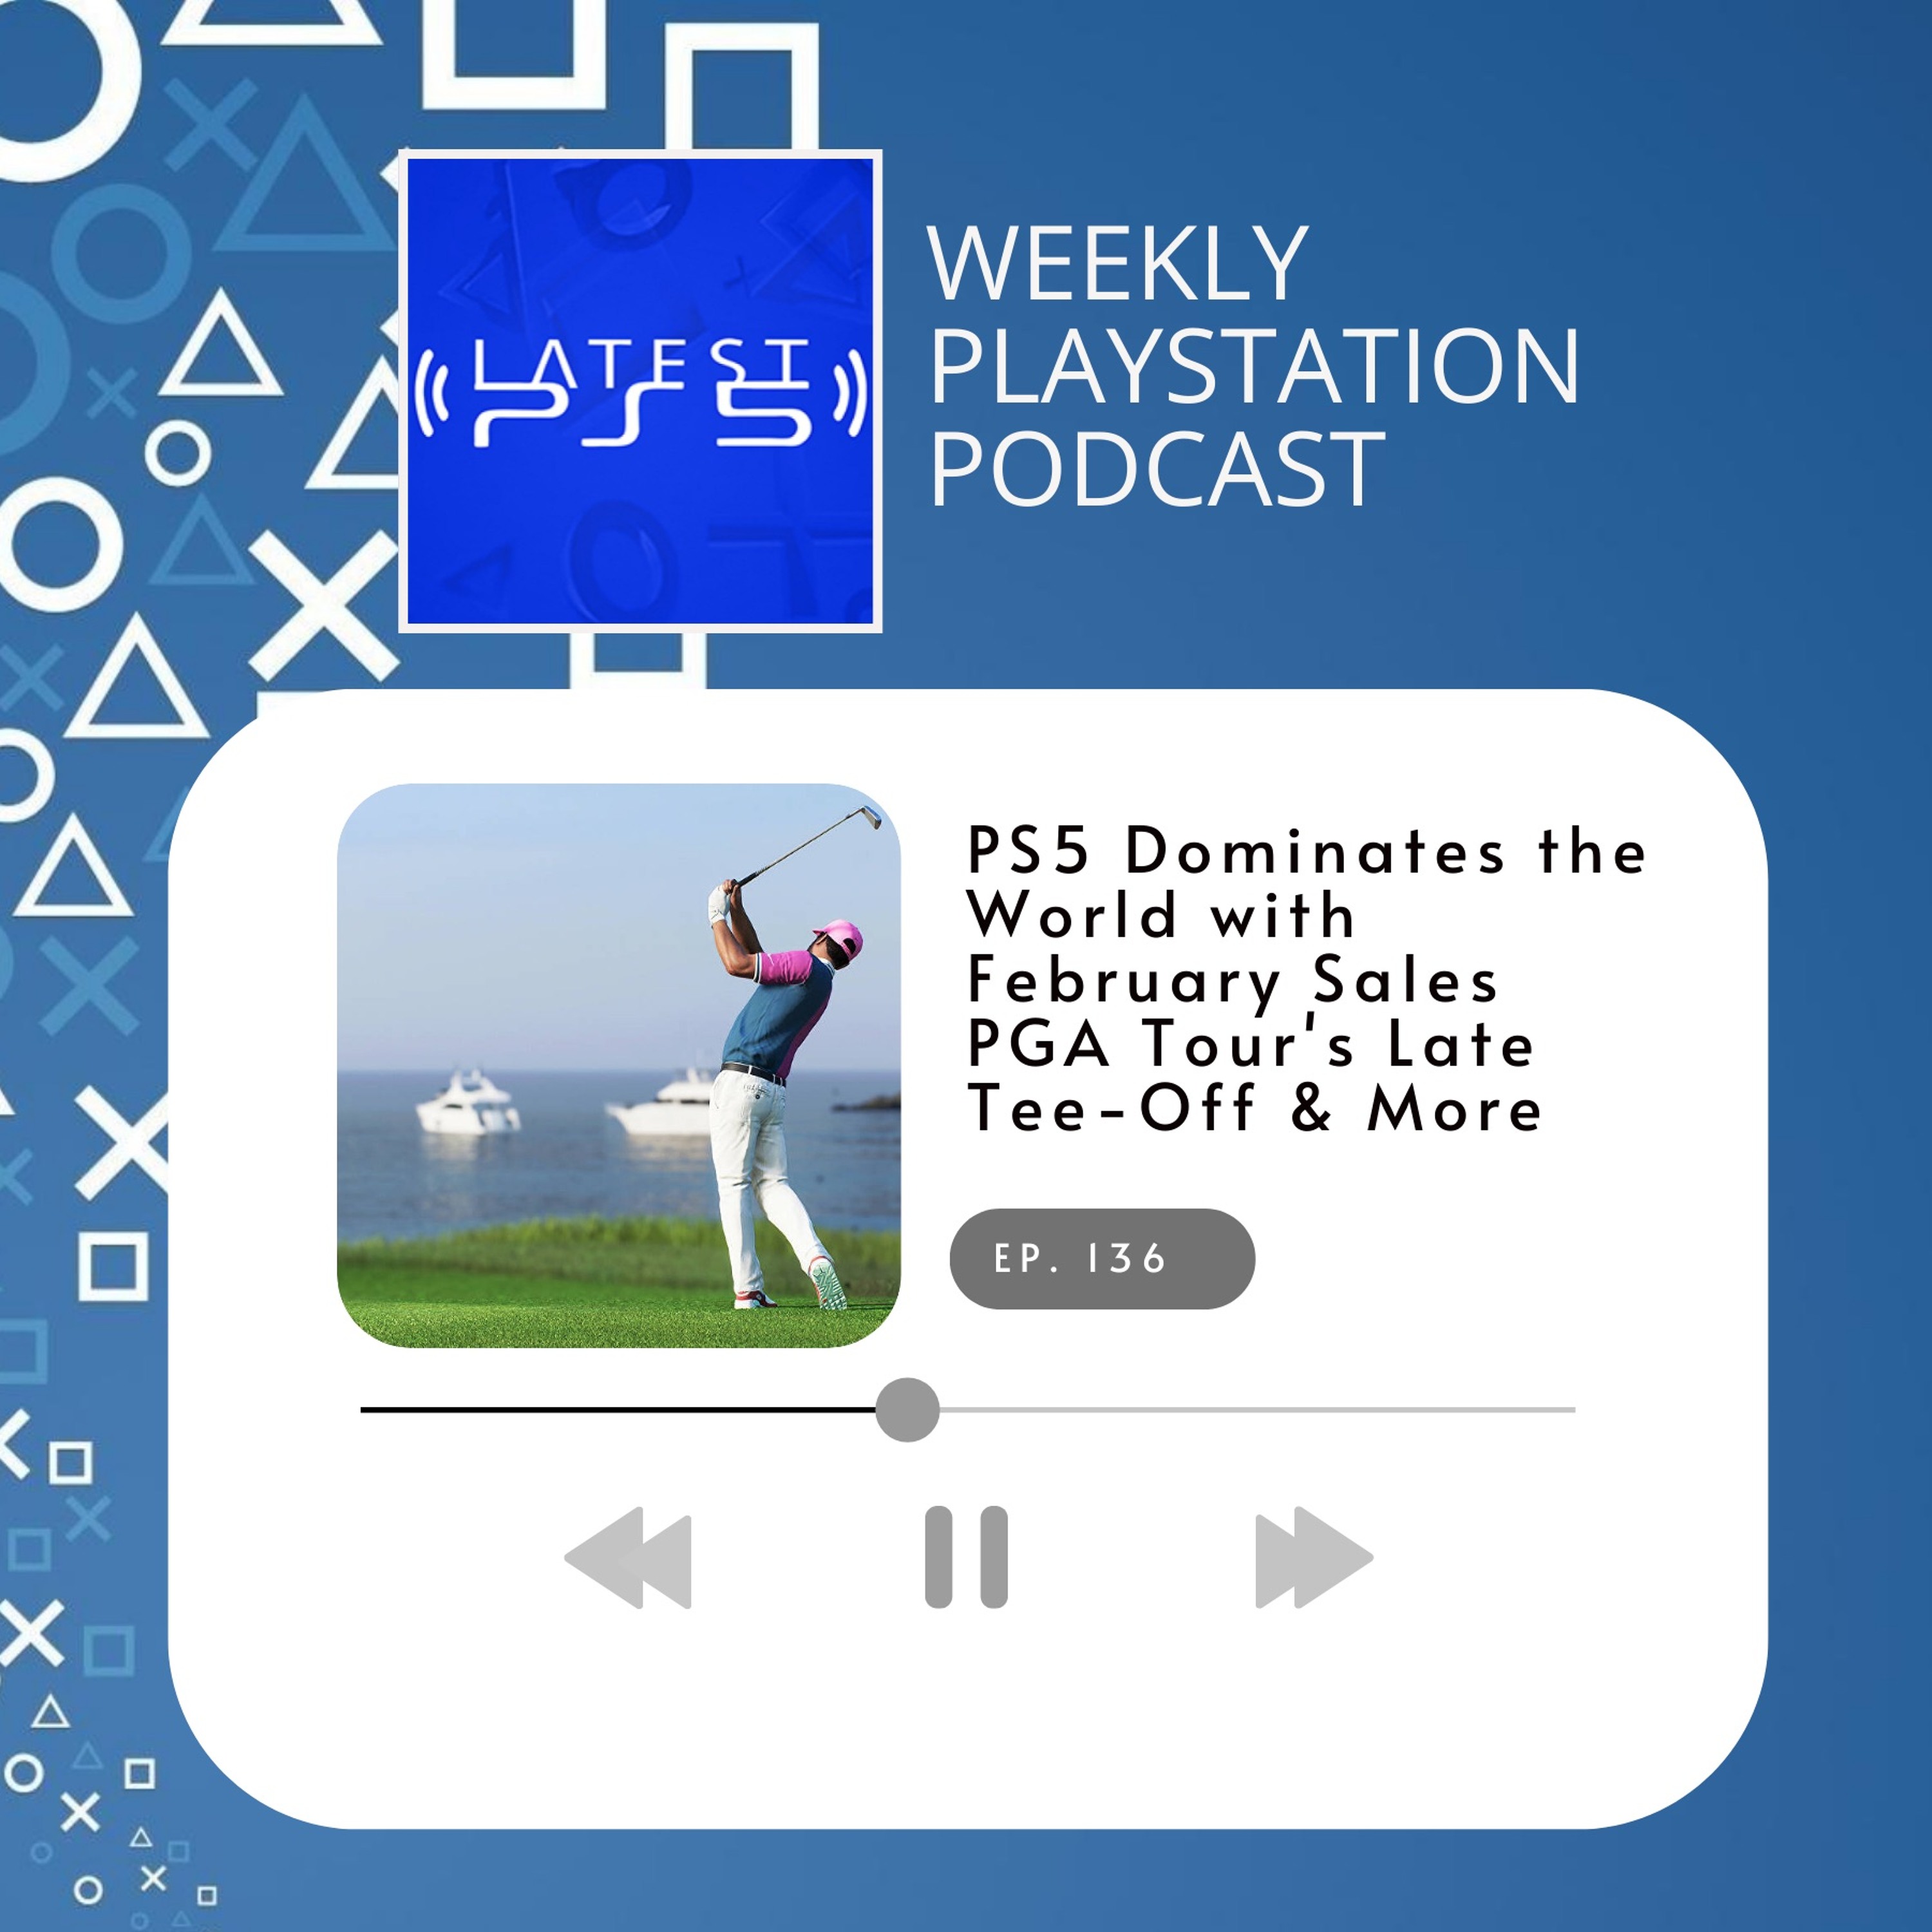 PS5 Dominates the World in February, PGA Tour's Late Tee-Off & More - Episode 136